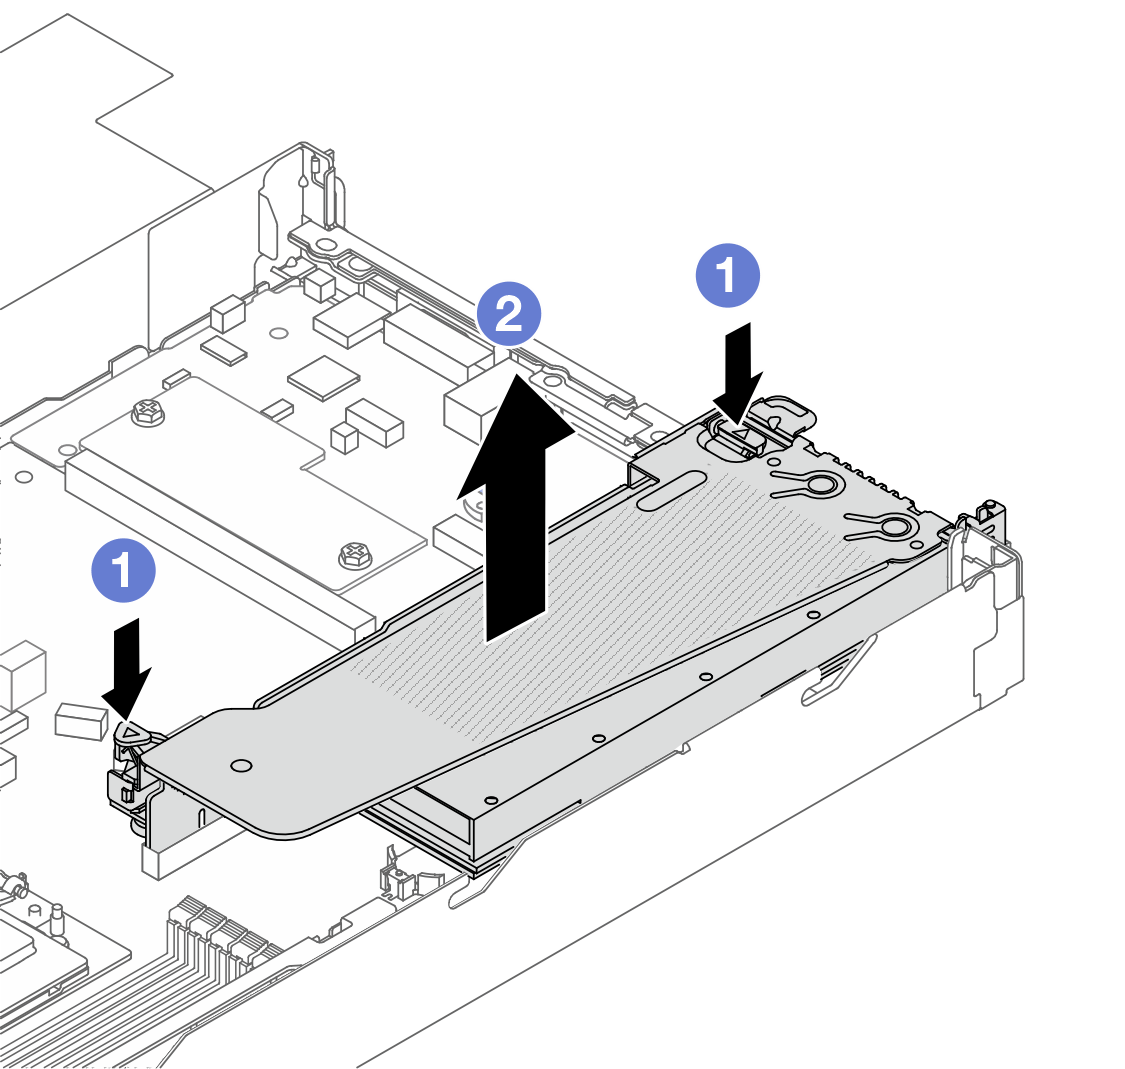 Removing the riser assembly